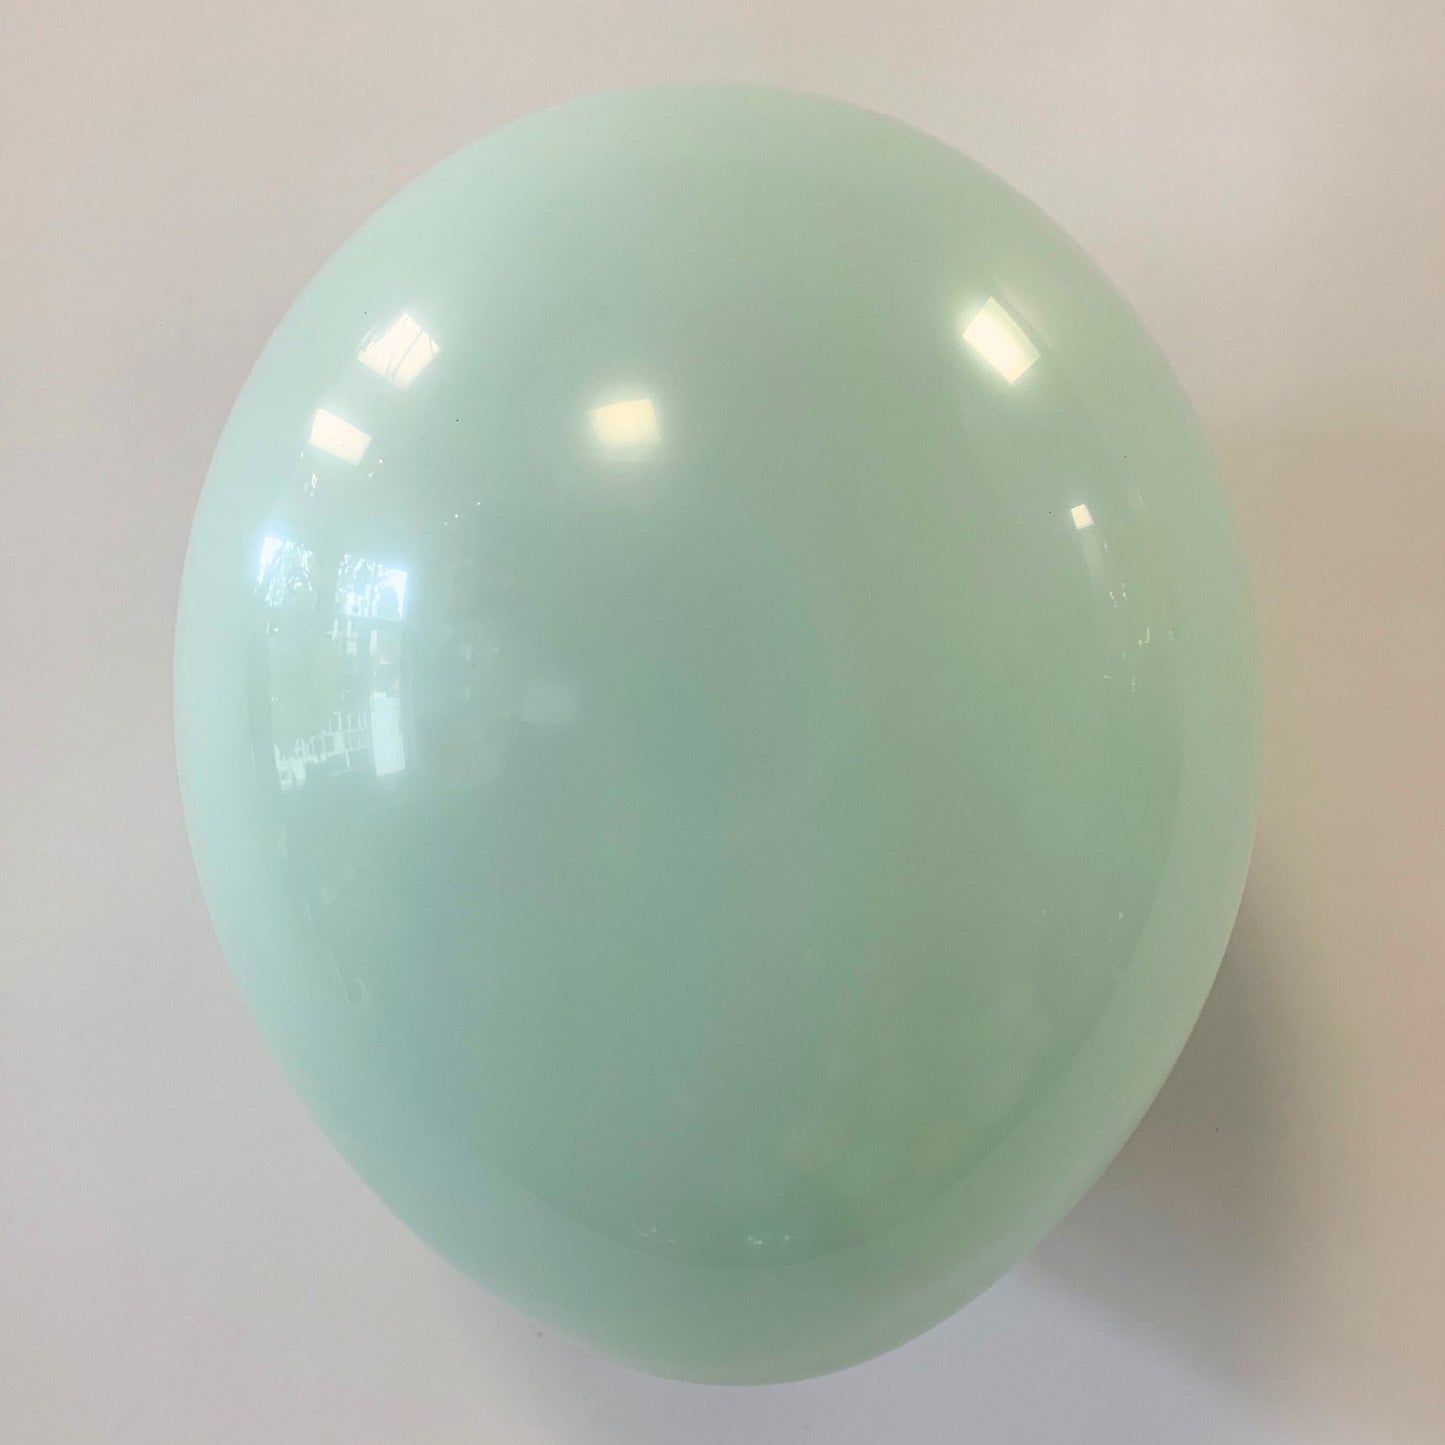 11 inch helium filled Mint latex balloon